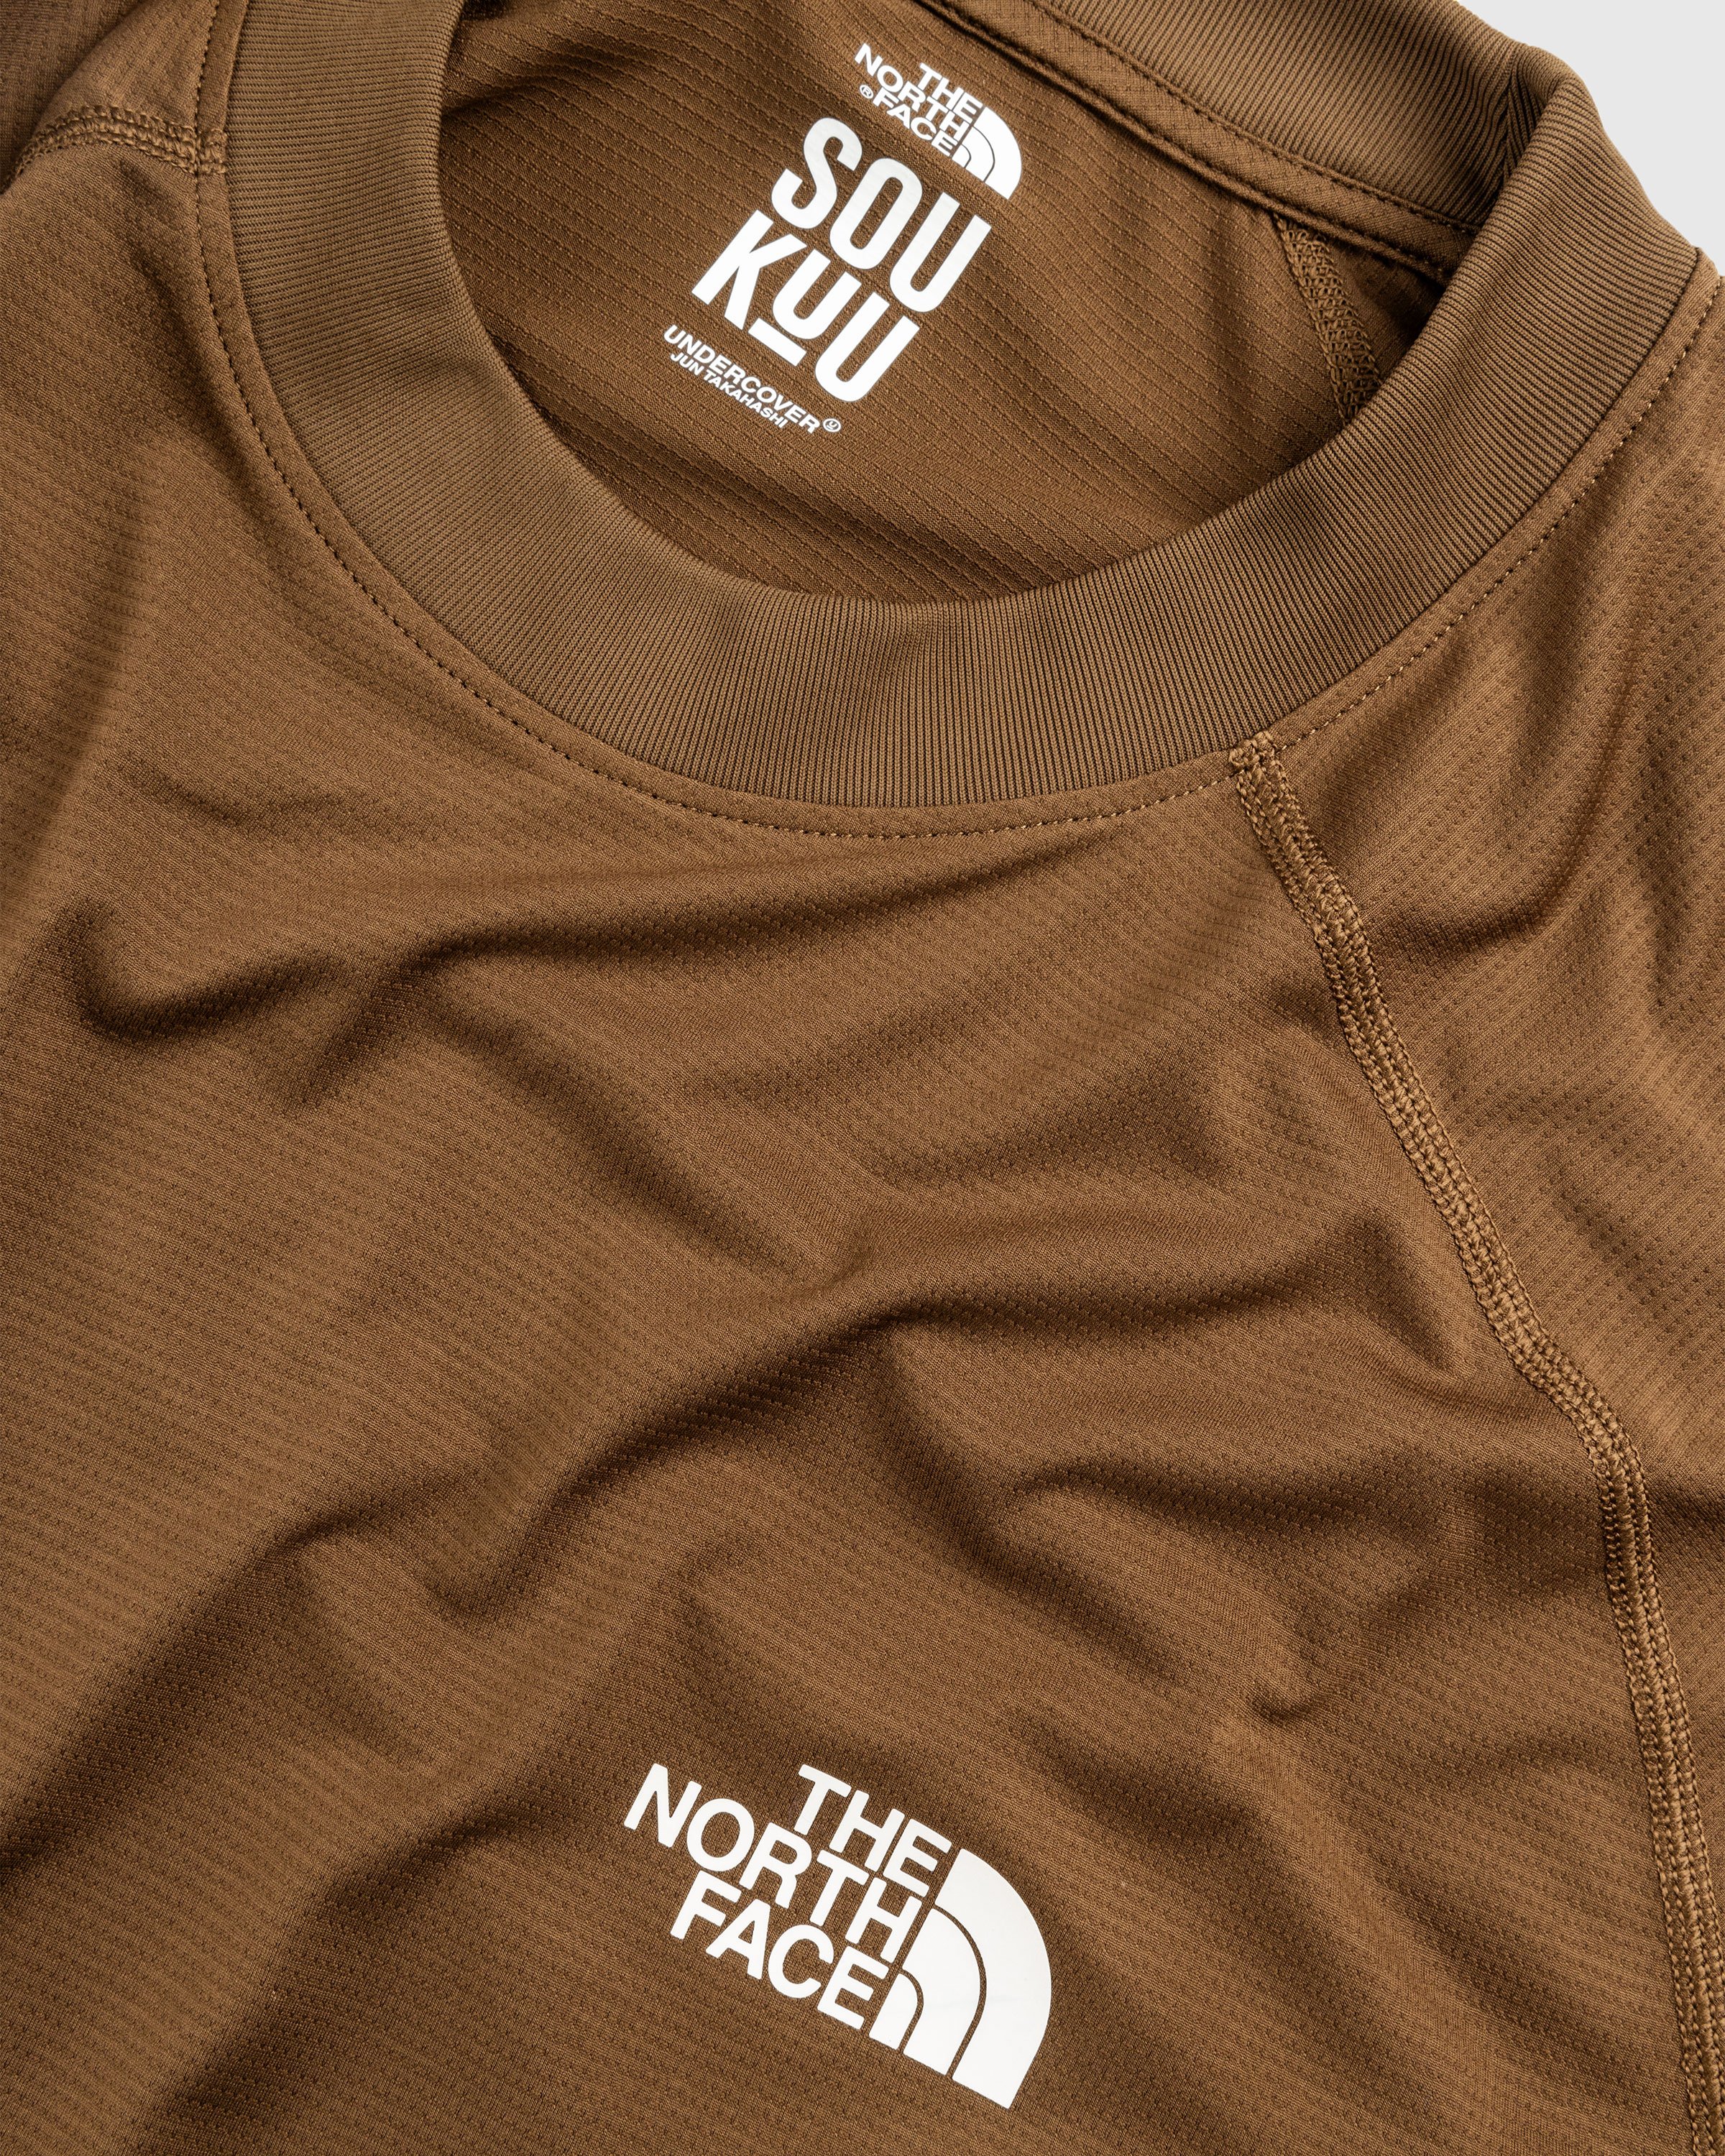 The North Face x UNDERCOVER - SOUKUU TRAIL RUN L/S TEE PERISCOPE GREY/DARK EAR - Clothing - Grey - Image 6